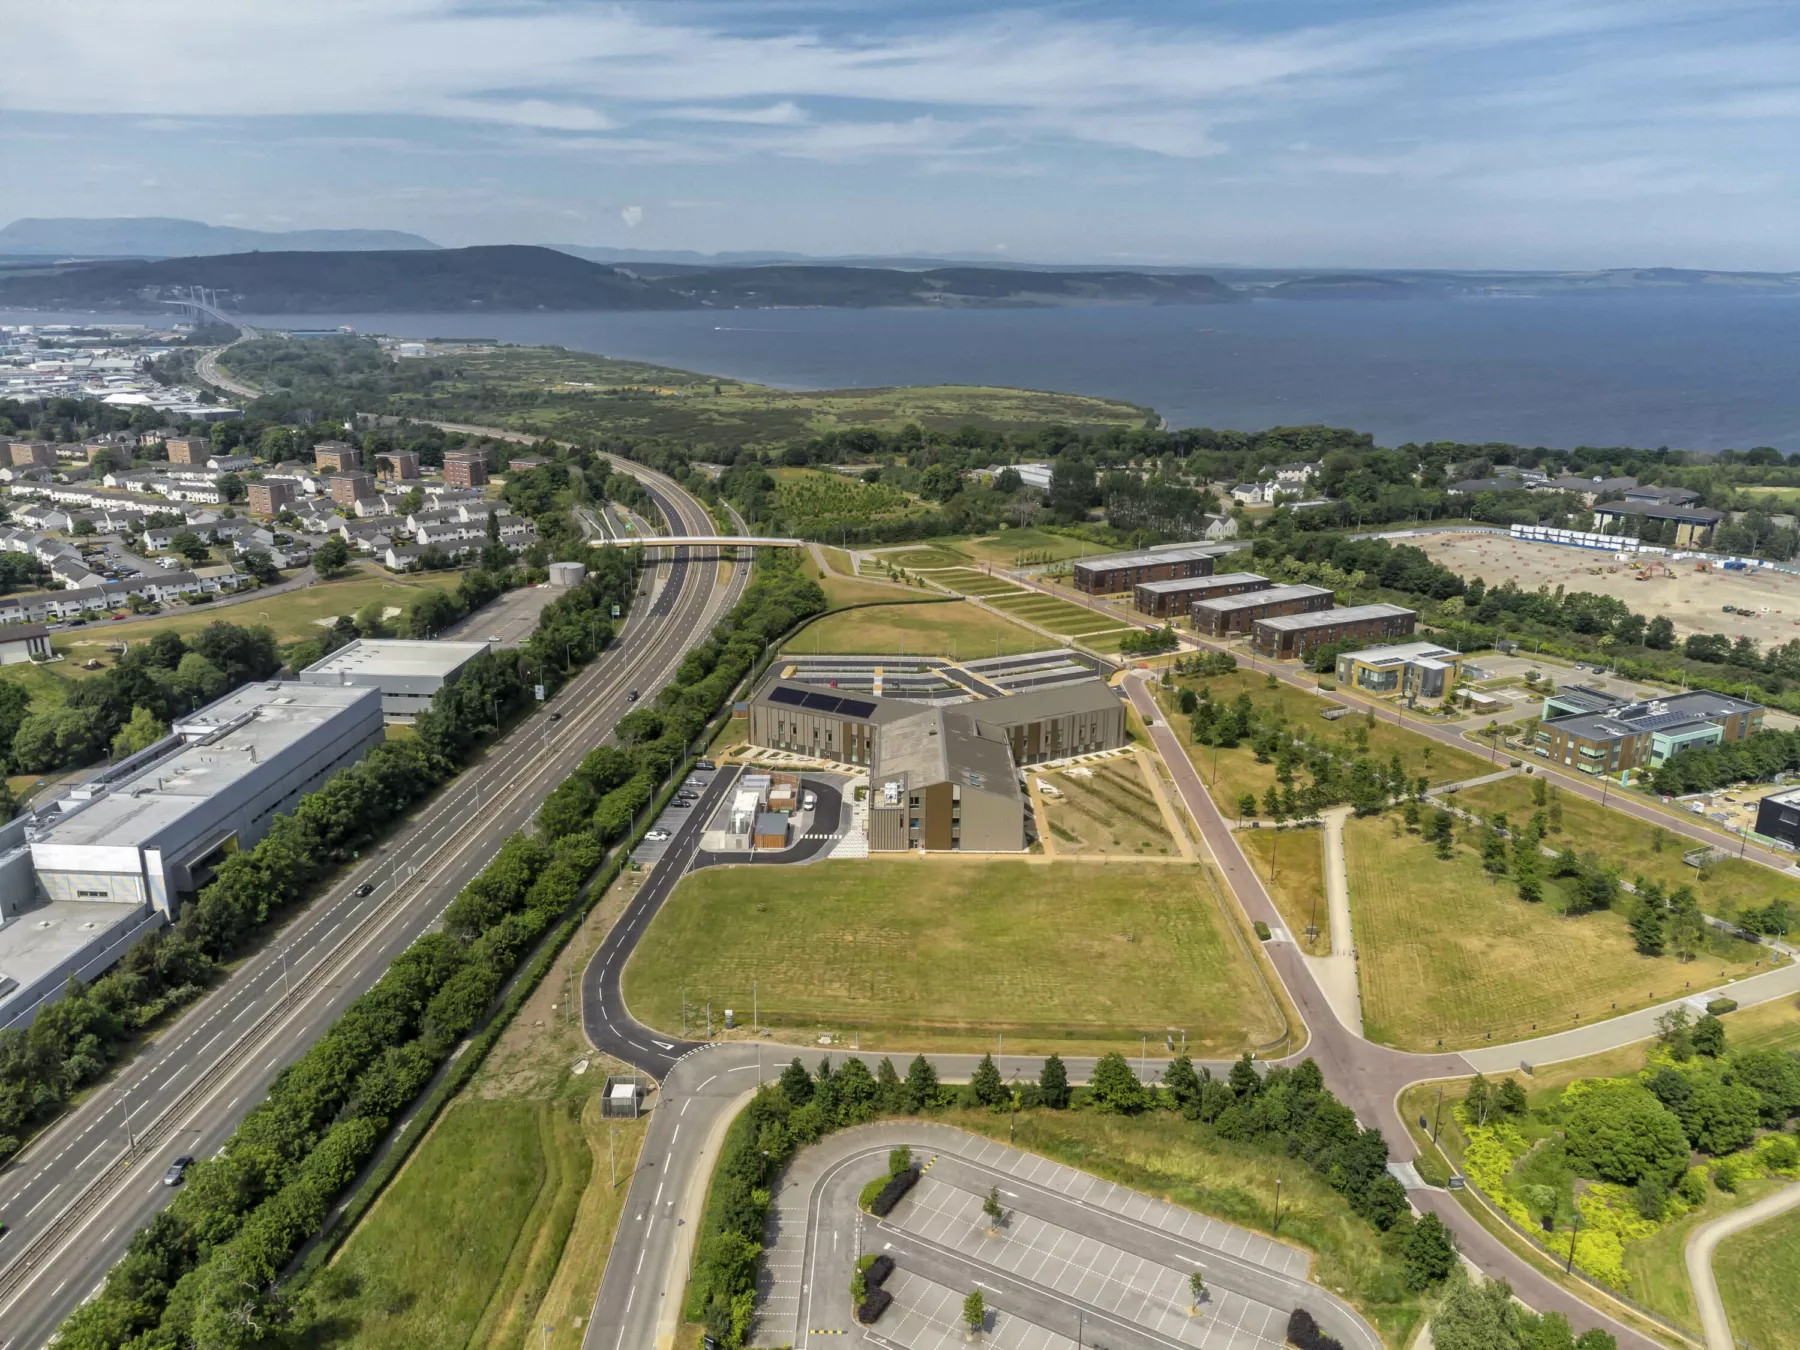 Aerial view of the National Treatment Centre - Highland, Inverness. Showing the new healthcare centre surrounded by green space and with a dual carriageway to the left hand side of the image. In the distance the sea.